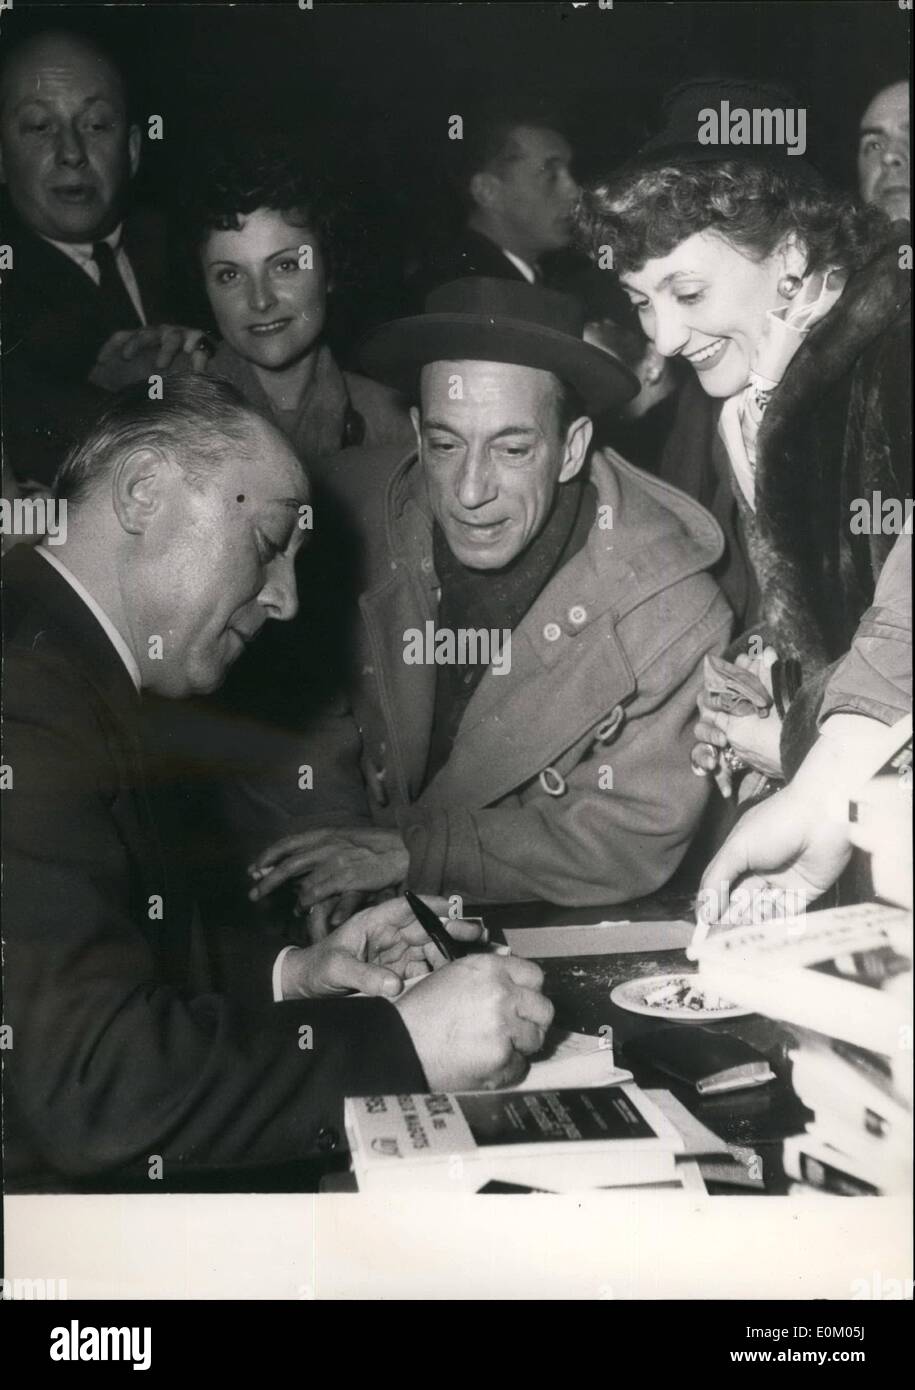 Feb. 02, 1953 - 'Slang' Author Autographs His Book In A ''Tough Joint'': Albert Simonin, The French Author who is specialised in underworld characters and writes his novels in slang autographs his latest book at the famous night cabaret ''Bal A Jo'' in the Rue De Lappe, supposedly a ''Tough Section'' of Paris. Looking on are Raymond Bussiers, screen actor and Annette Poivre. Stock Photo